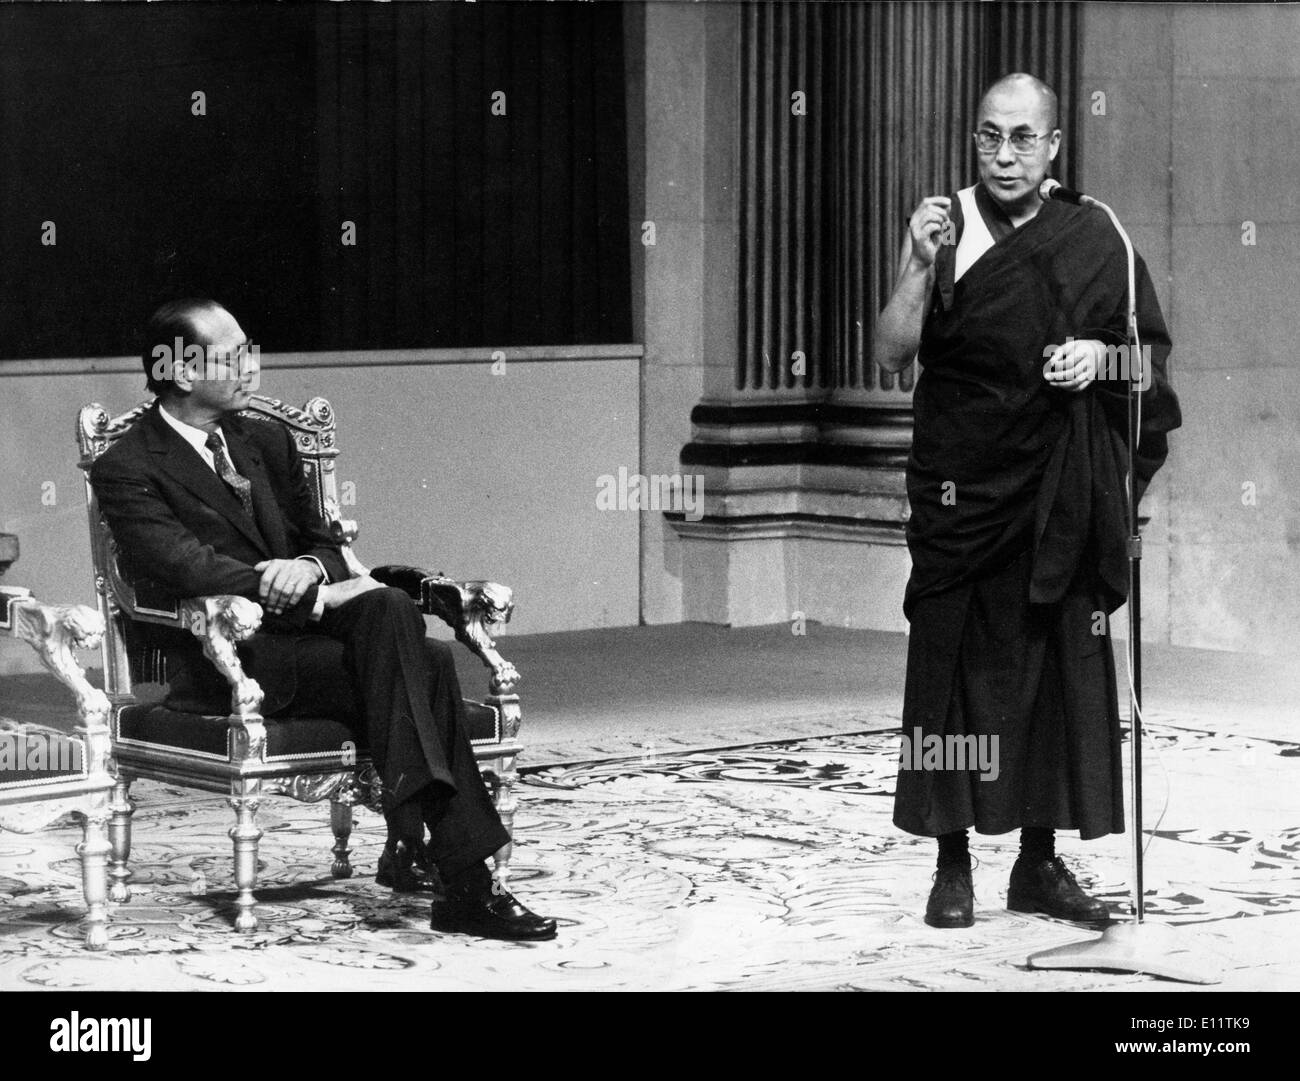 Tibetan spiritual Religious leader 14th DALAI LAMA in a meeting with French politician JACQUES CHIRAC Stock Photo